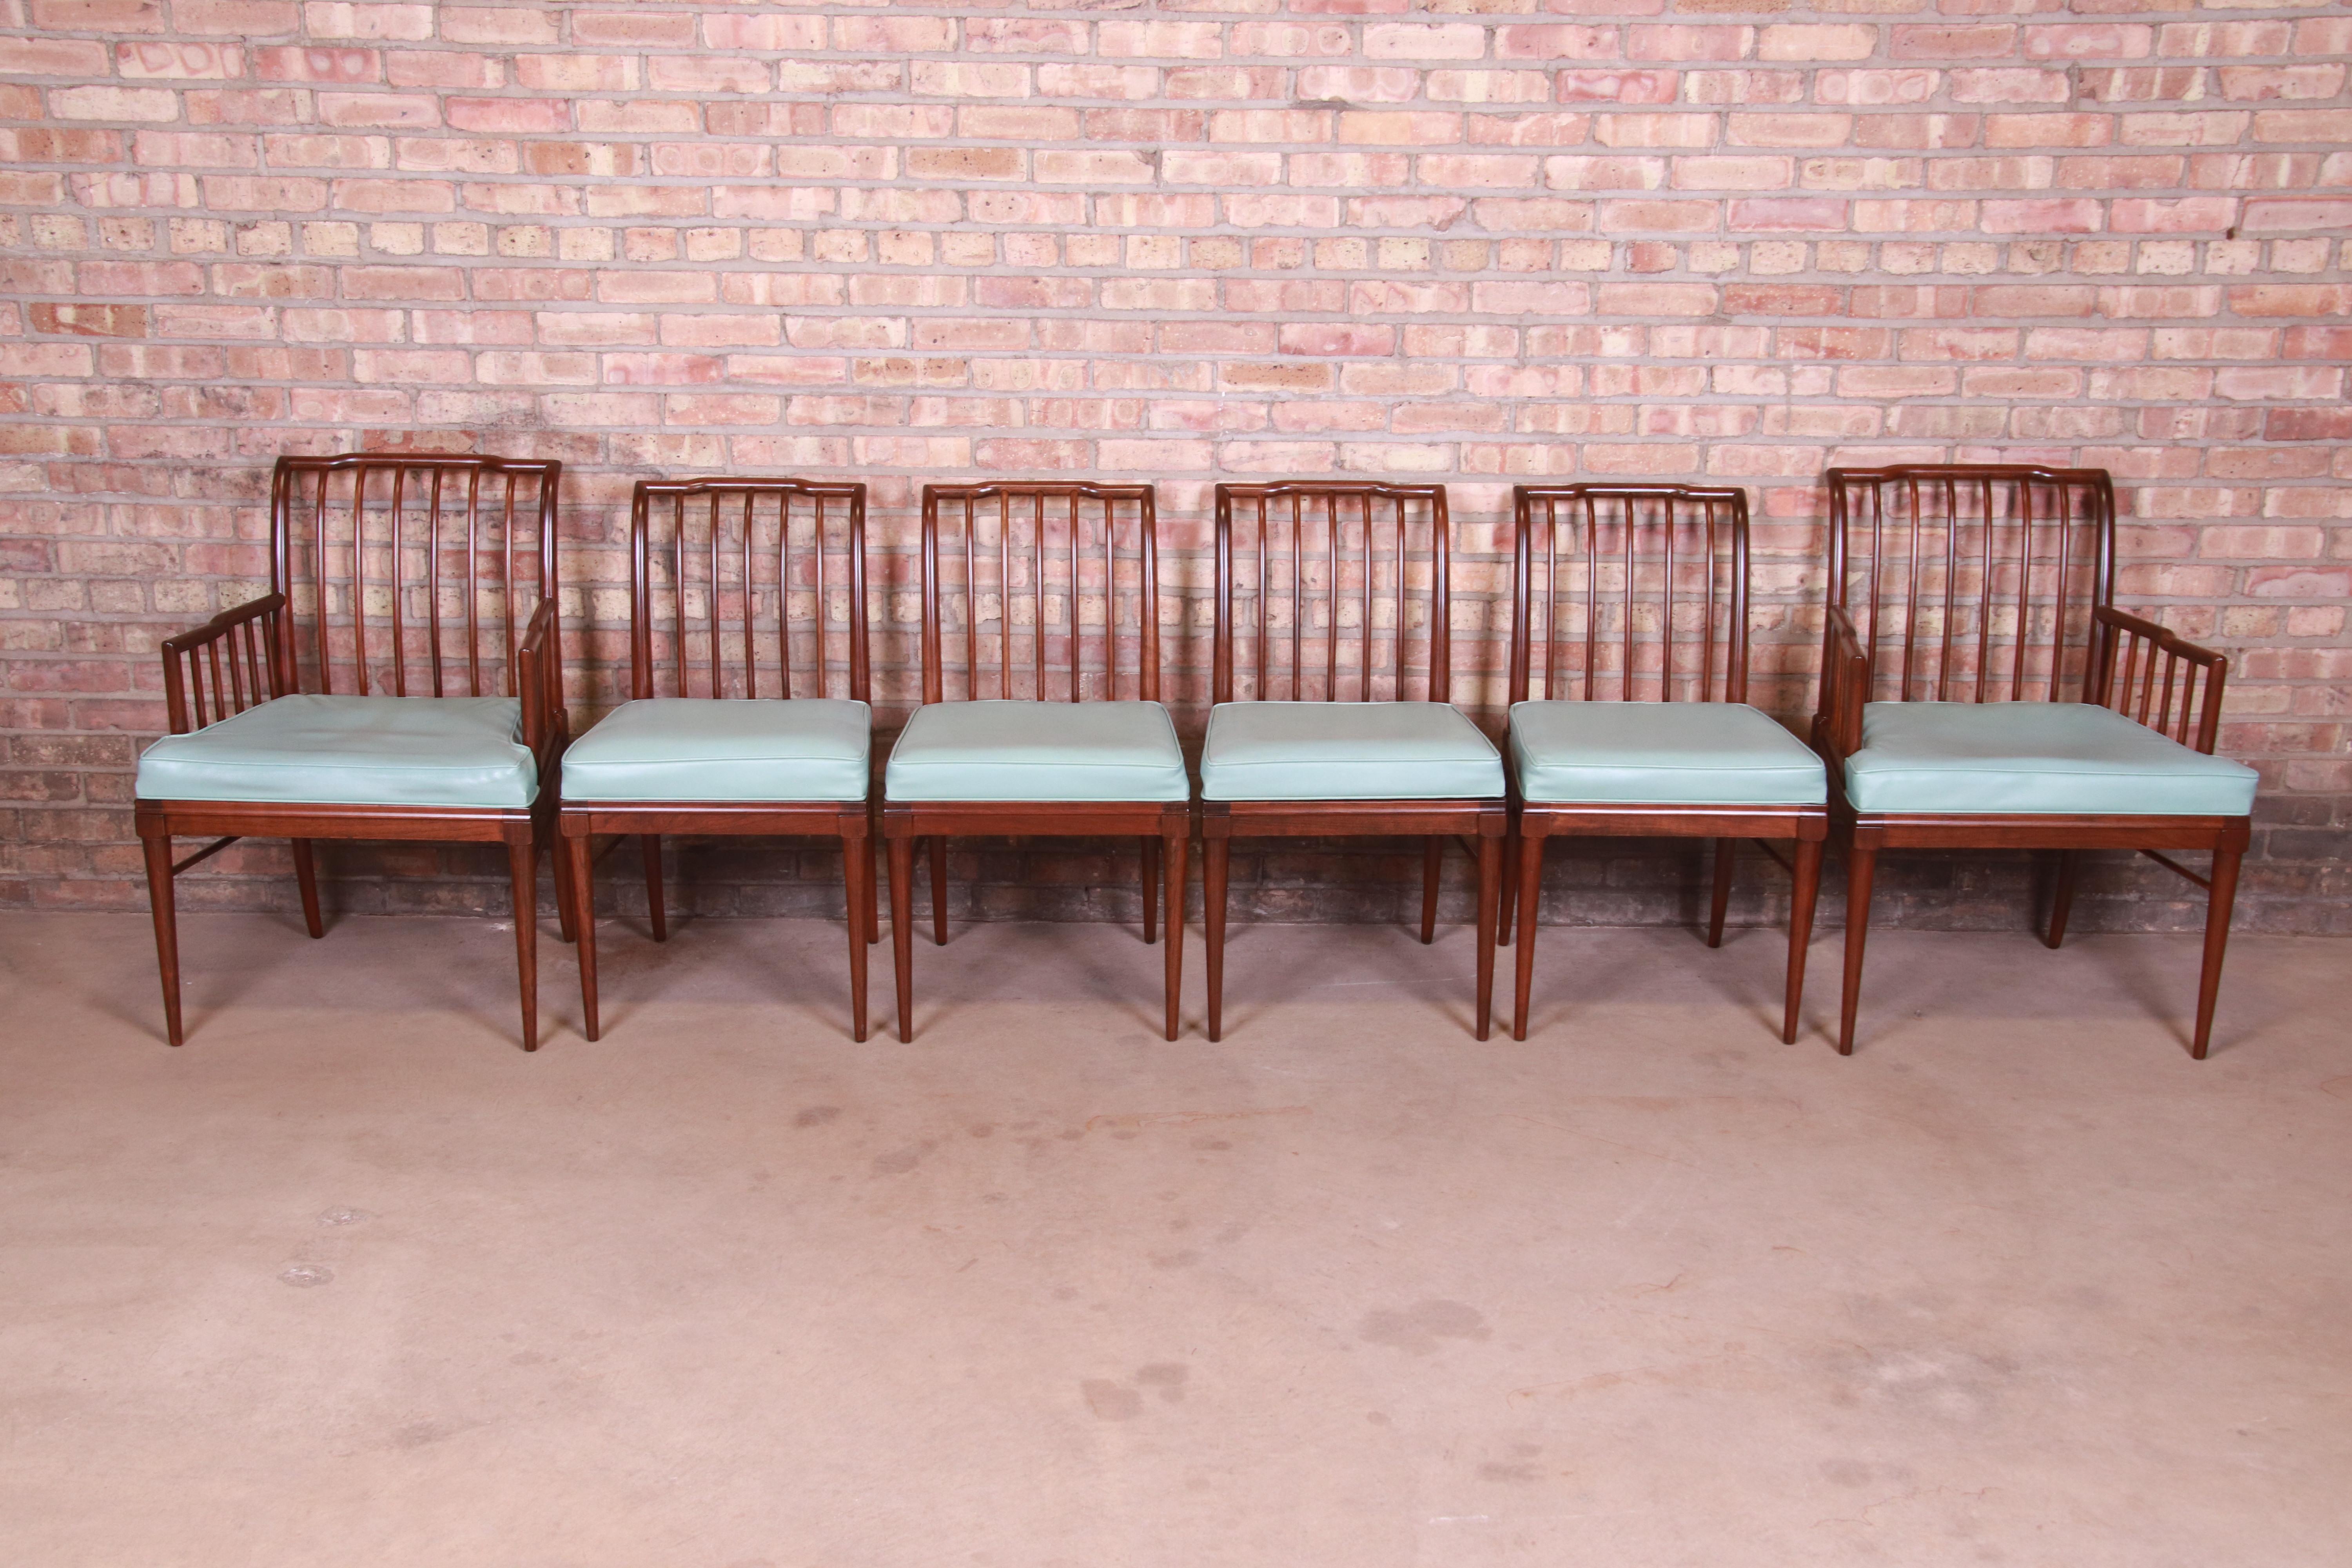 A gorgeous set of six Mid-Century Modern dining chairs

In the manner of T.H. Robsjohn-Gibbings

By John Widdicomb

USA, circa 1950s

Sculpted walnut, with original light blue vinyl upholstered seats.

Measures:
Armchairs - 24